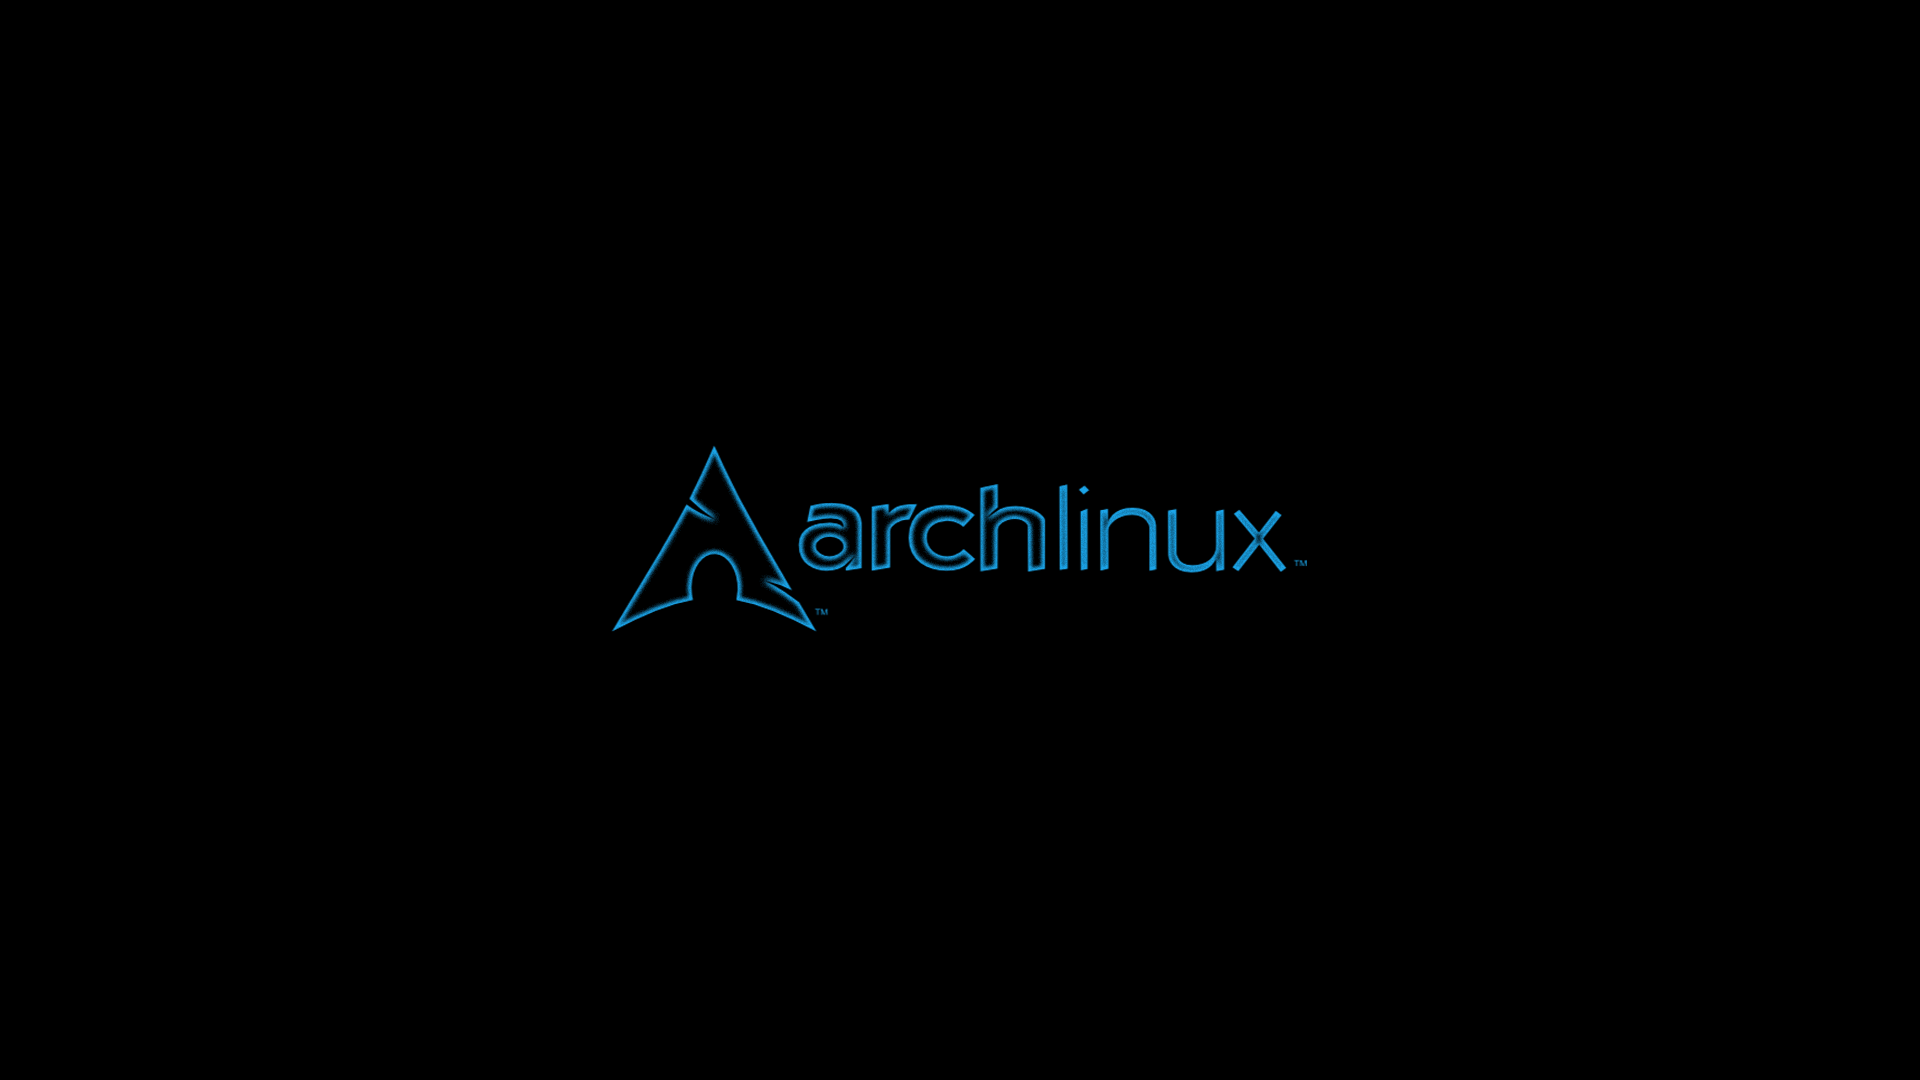 General 1920x1080 Linux Arch Linux minimalism simple background black background logo operating system